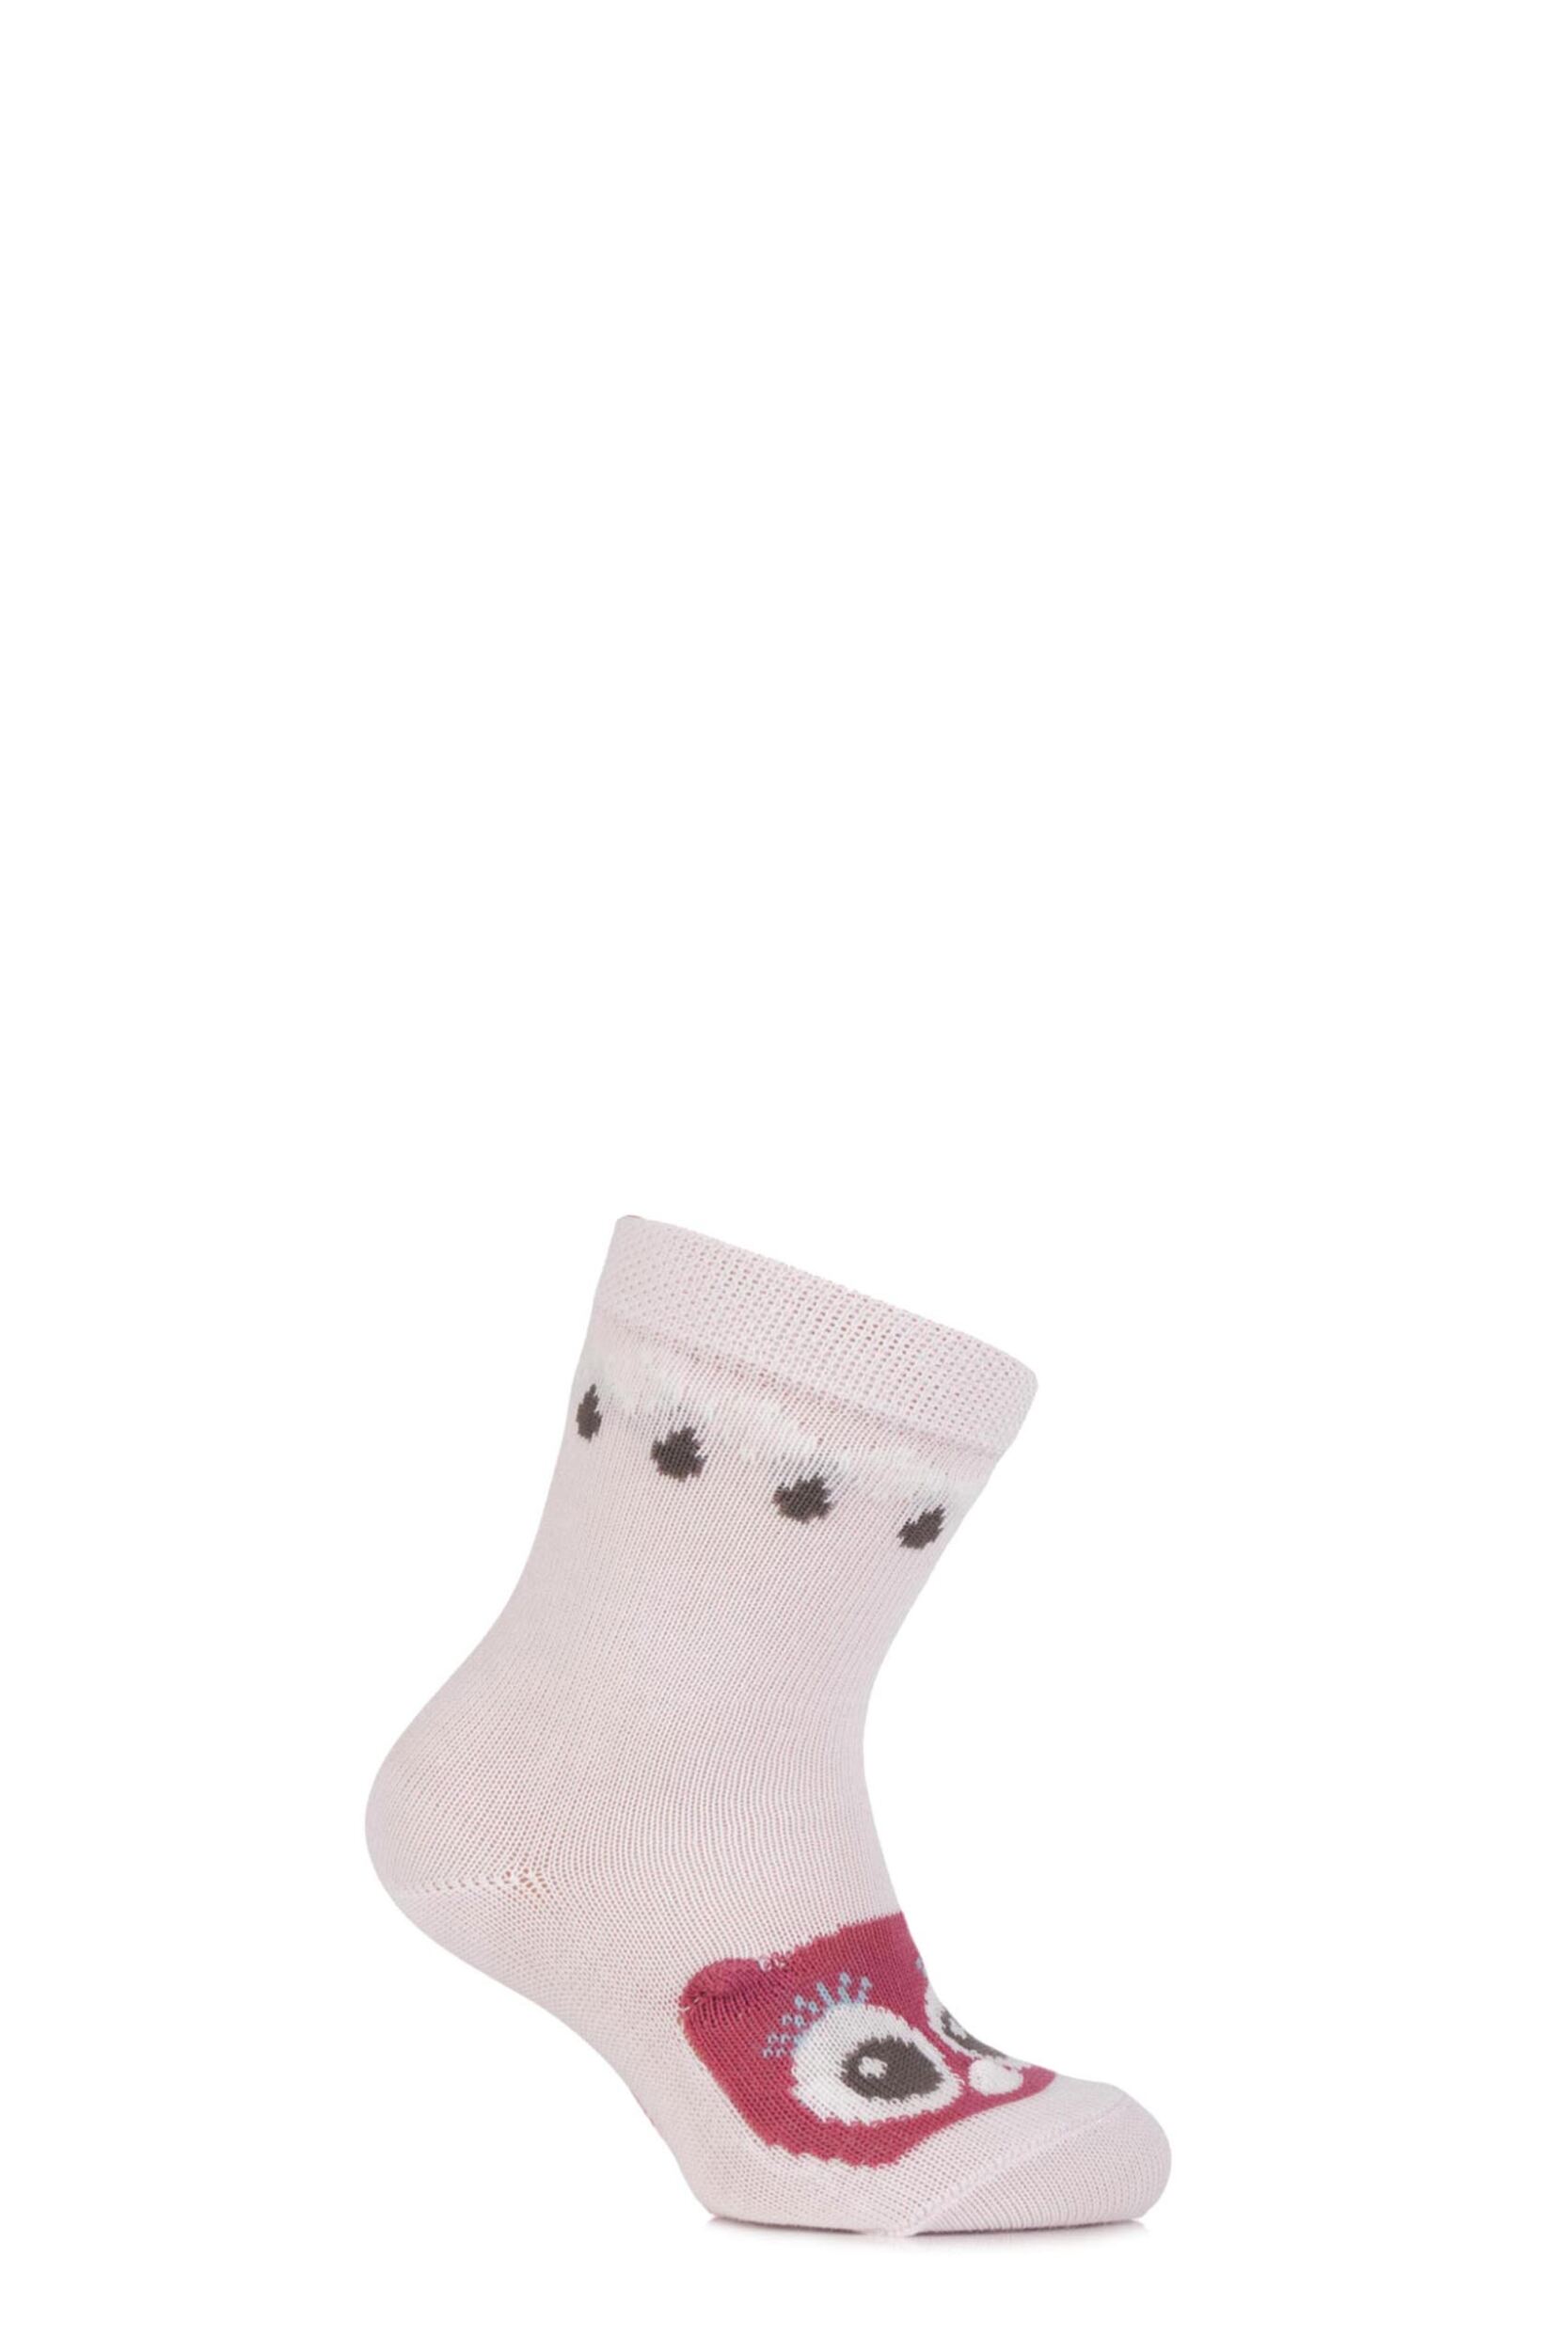 Stockists of Babies 1 Pair Falke Cotton Owl Socks with 3D Ears and Nose